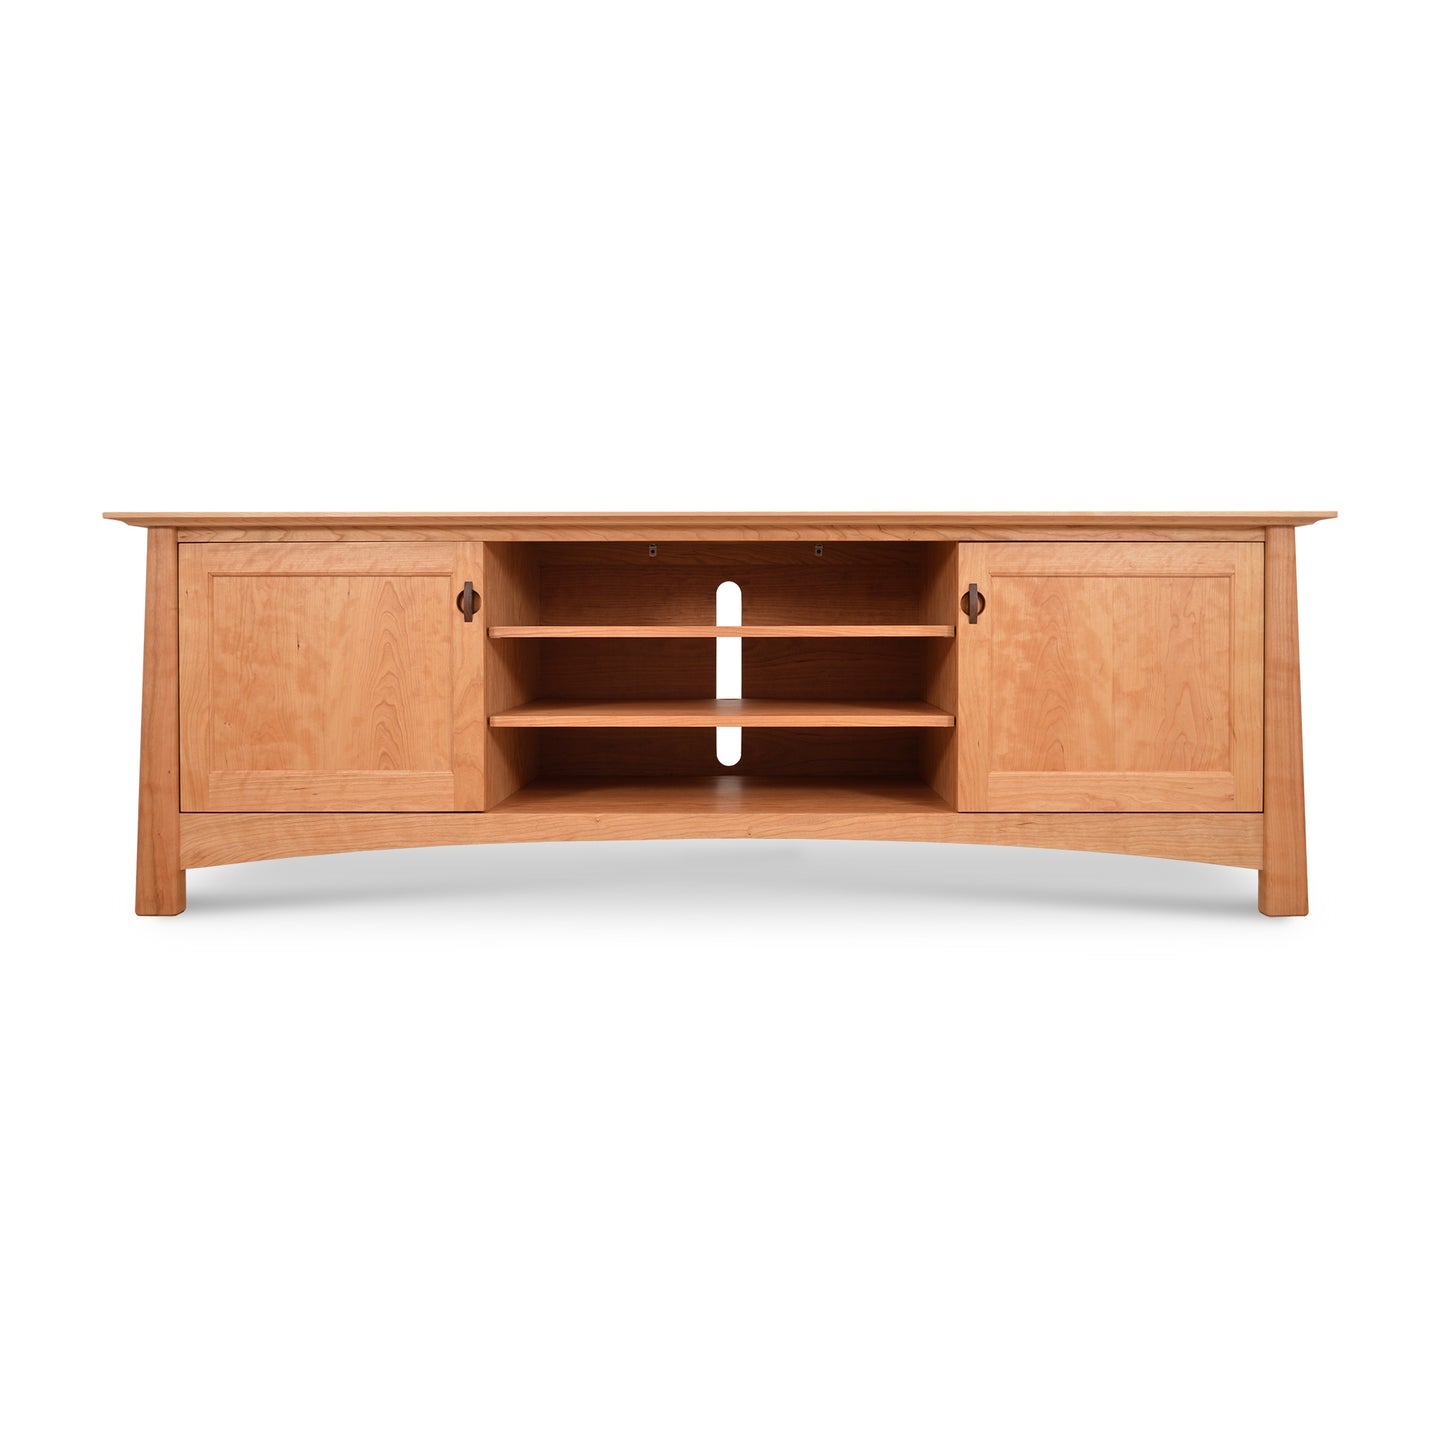 A Maple Corner Woodworks Cherry Moon 80" TV-Media Console, made of walnut wood, featuring shelves and drawers to function as a versatile media center.